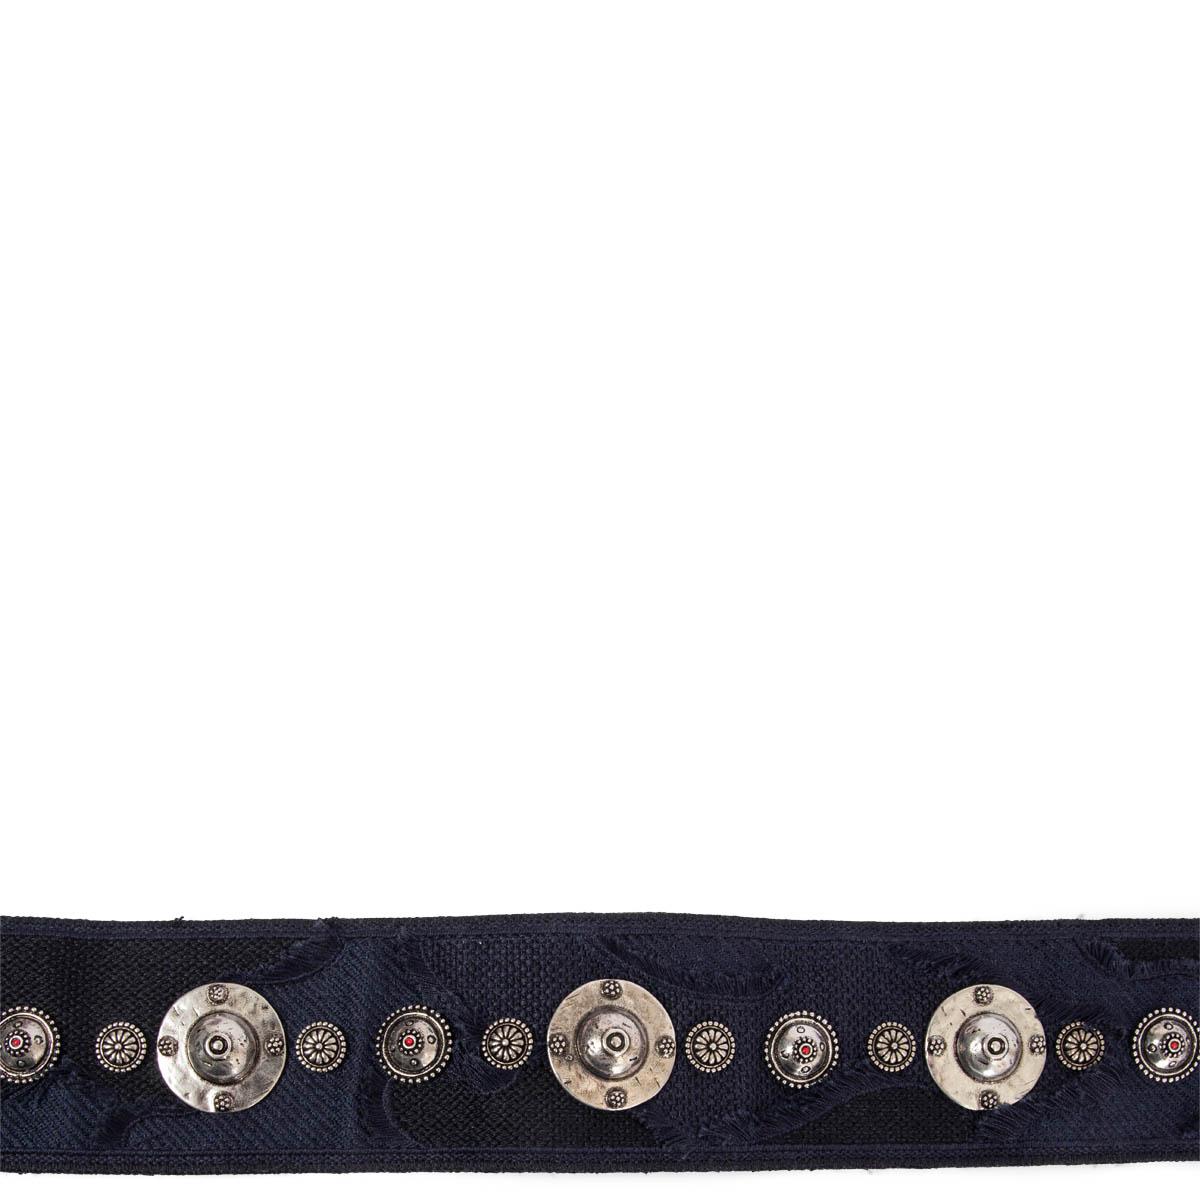 100% authentic Christian Dior Bohemian silver-tone studded metal emblems belt strap in shades of navy blue canvas featuring gold-tone clasps and black leather trimming. Has been carried and is in excellent condition. 

2020